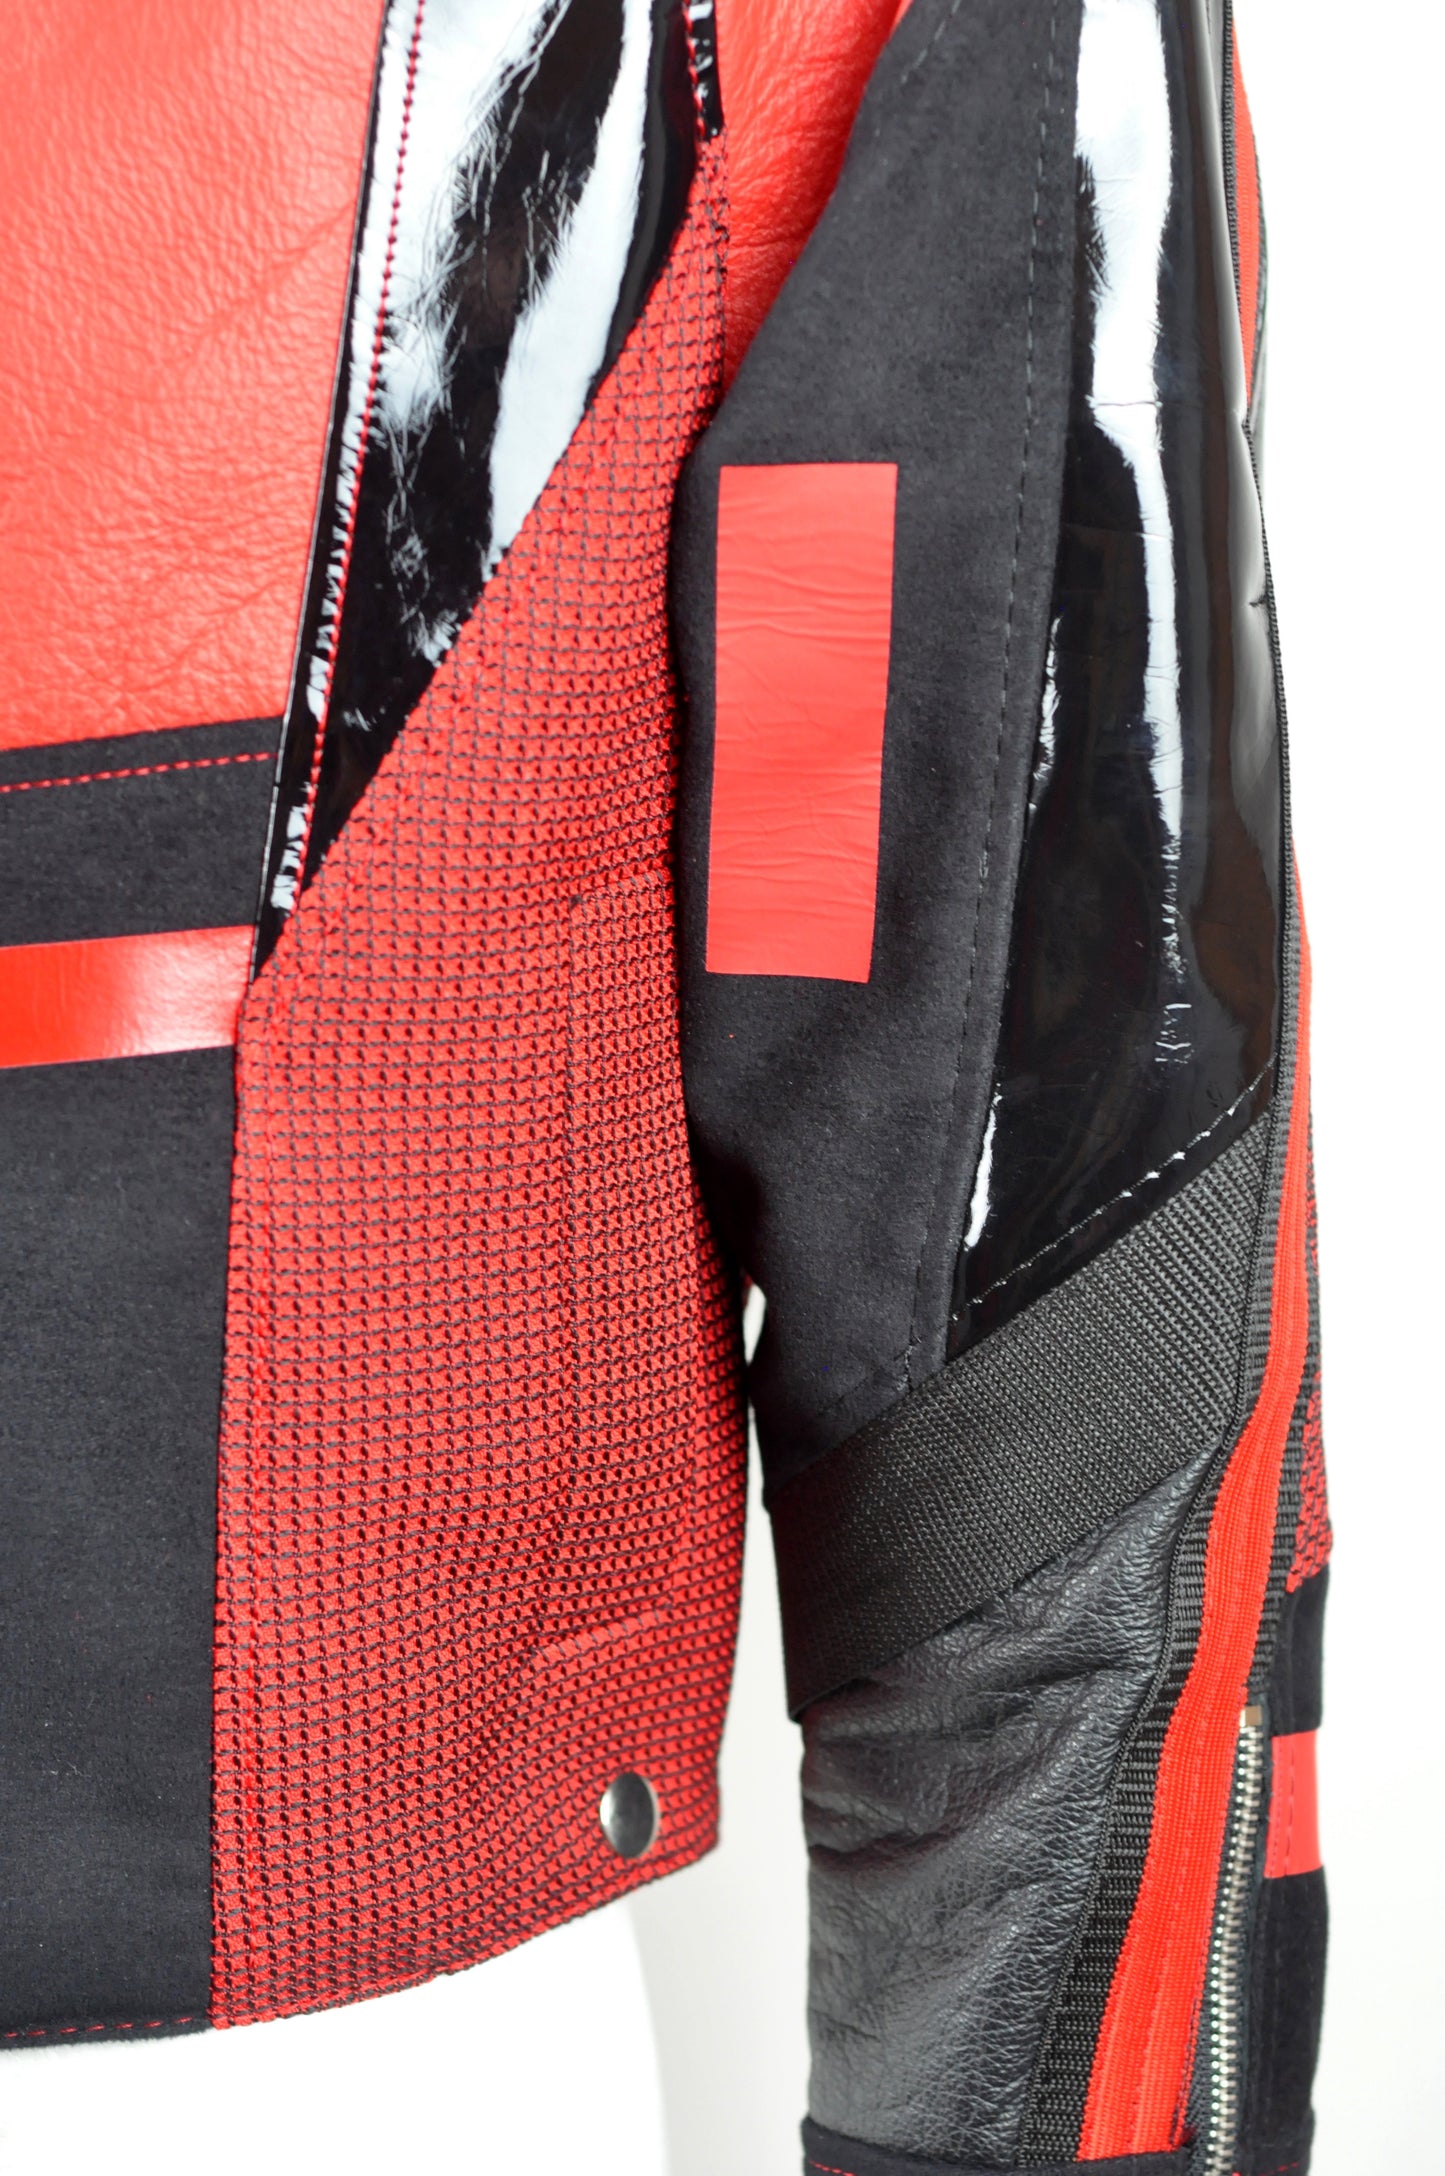 detail van Red Light Rider jacket, techno outfit